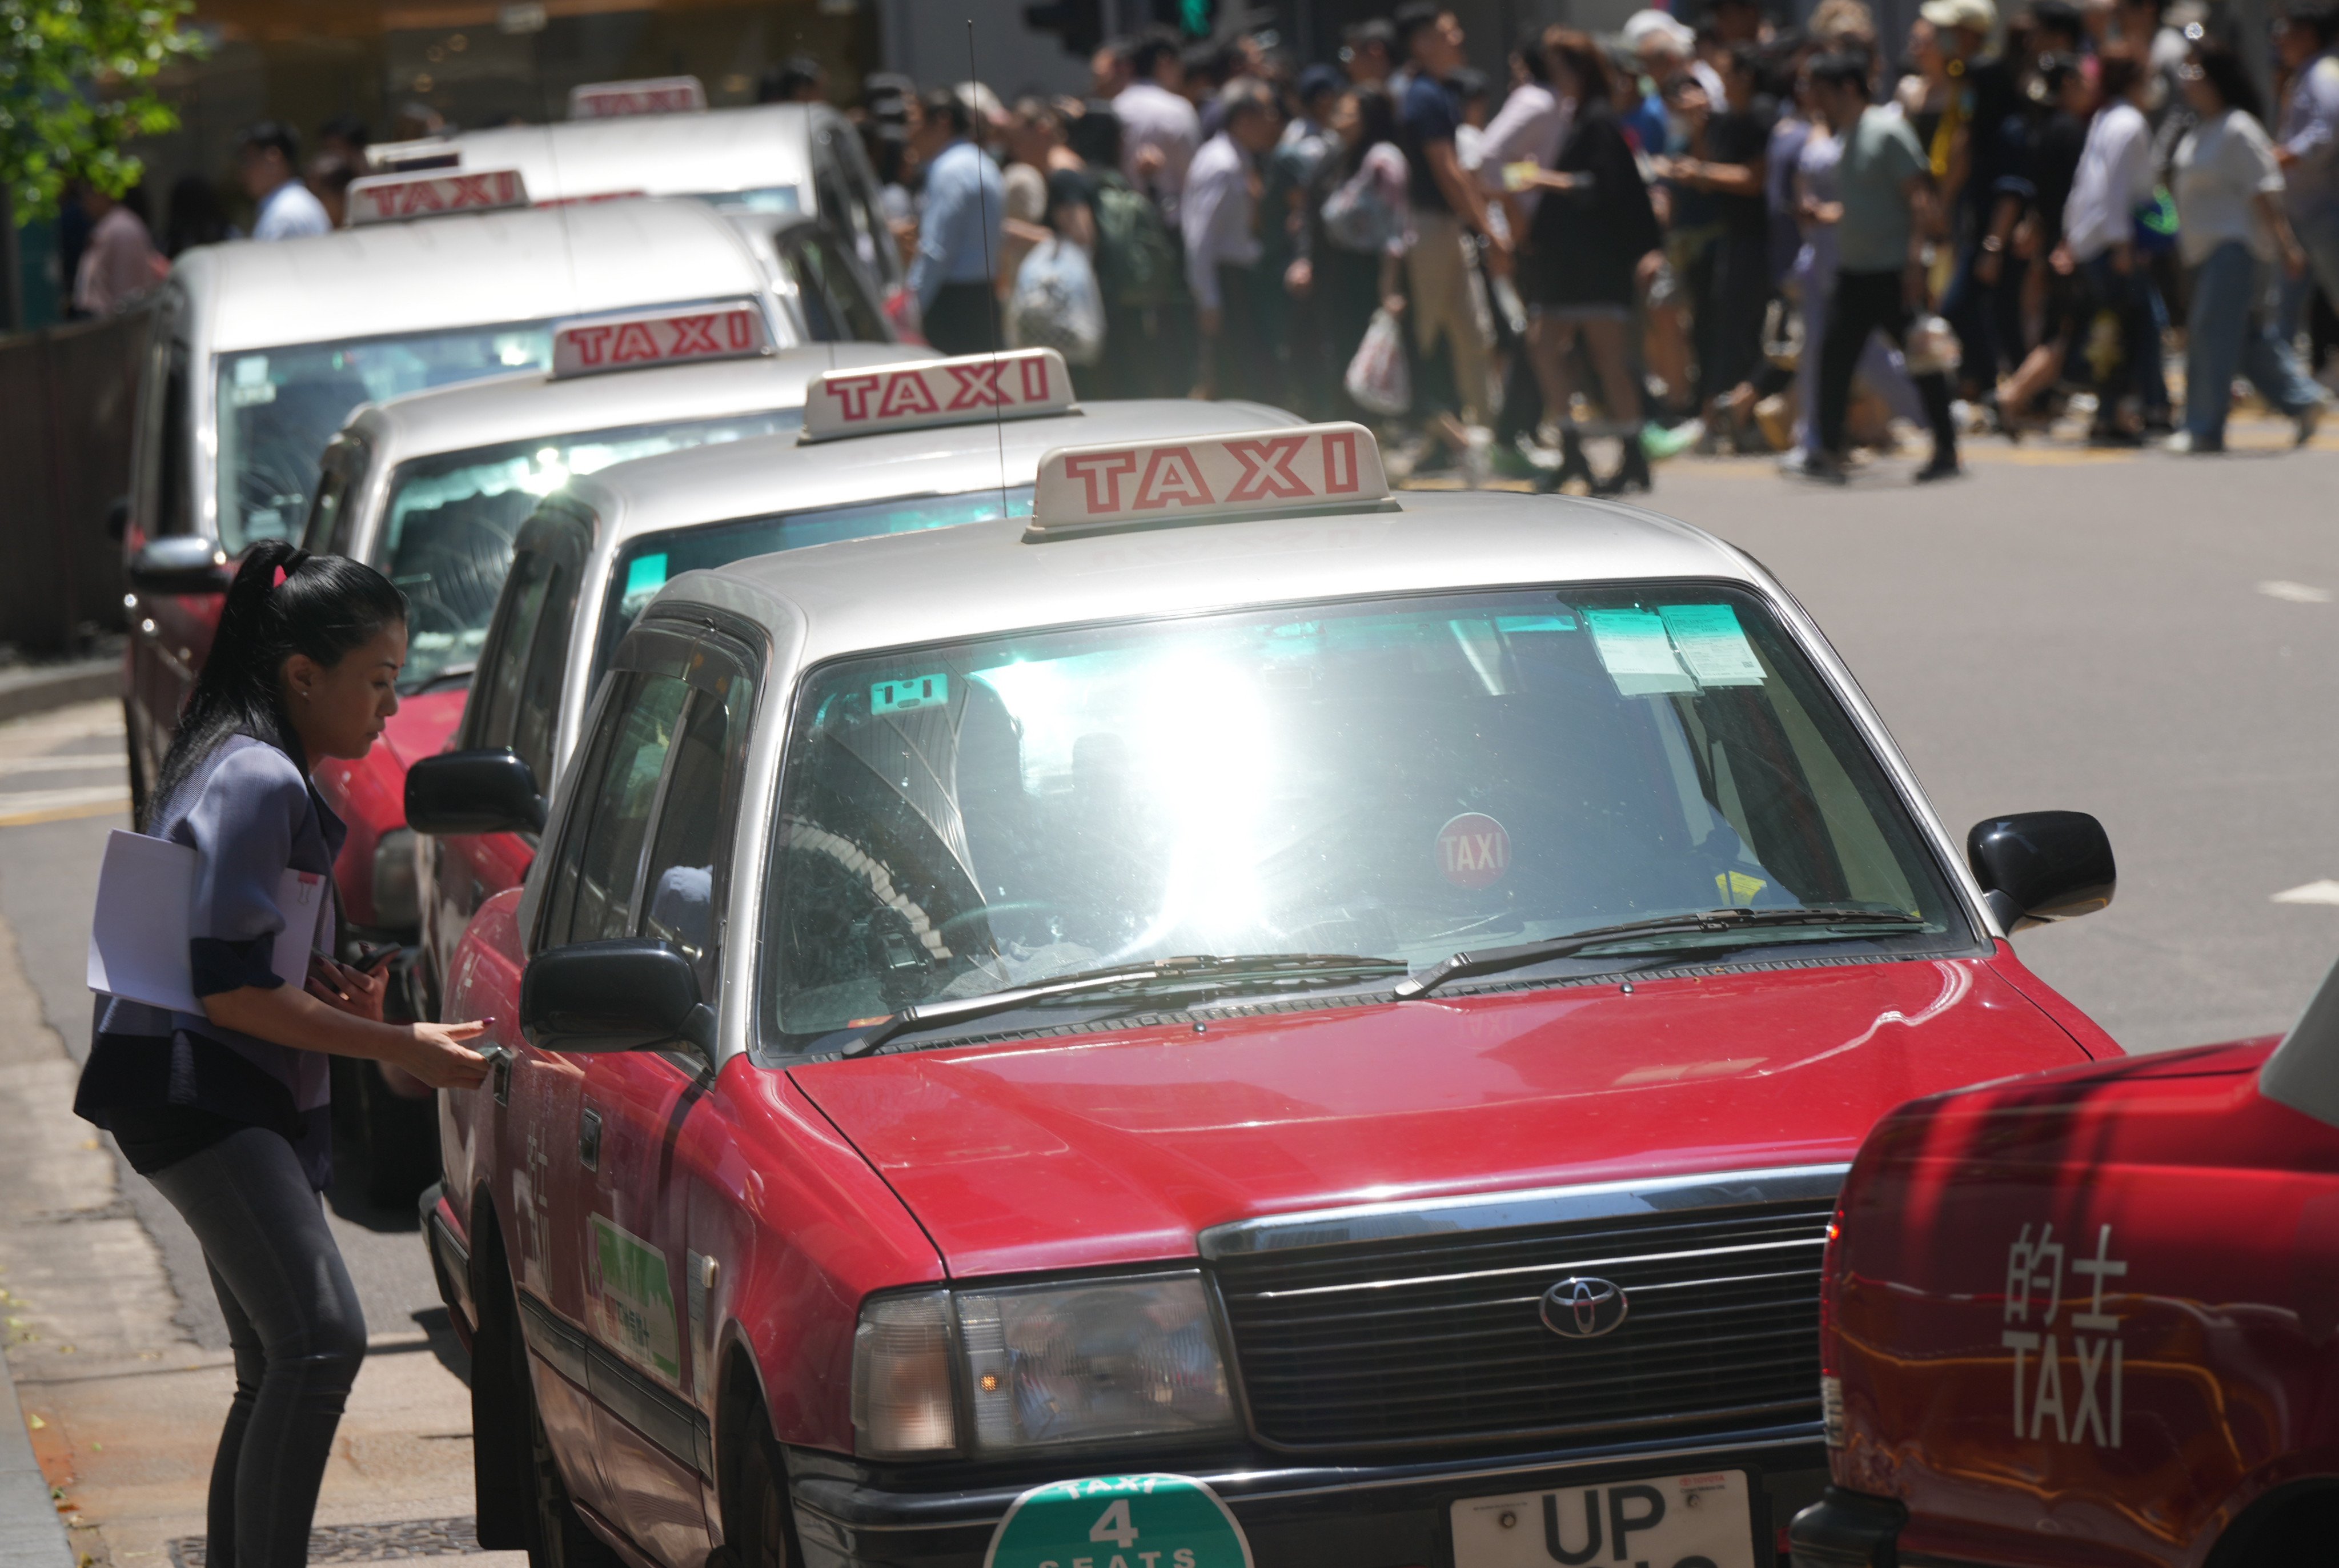 The new premium taxi scheme aims to better regulate companies, enhance quality of services and improve the reputation of the industry. Photo: May Tse